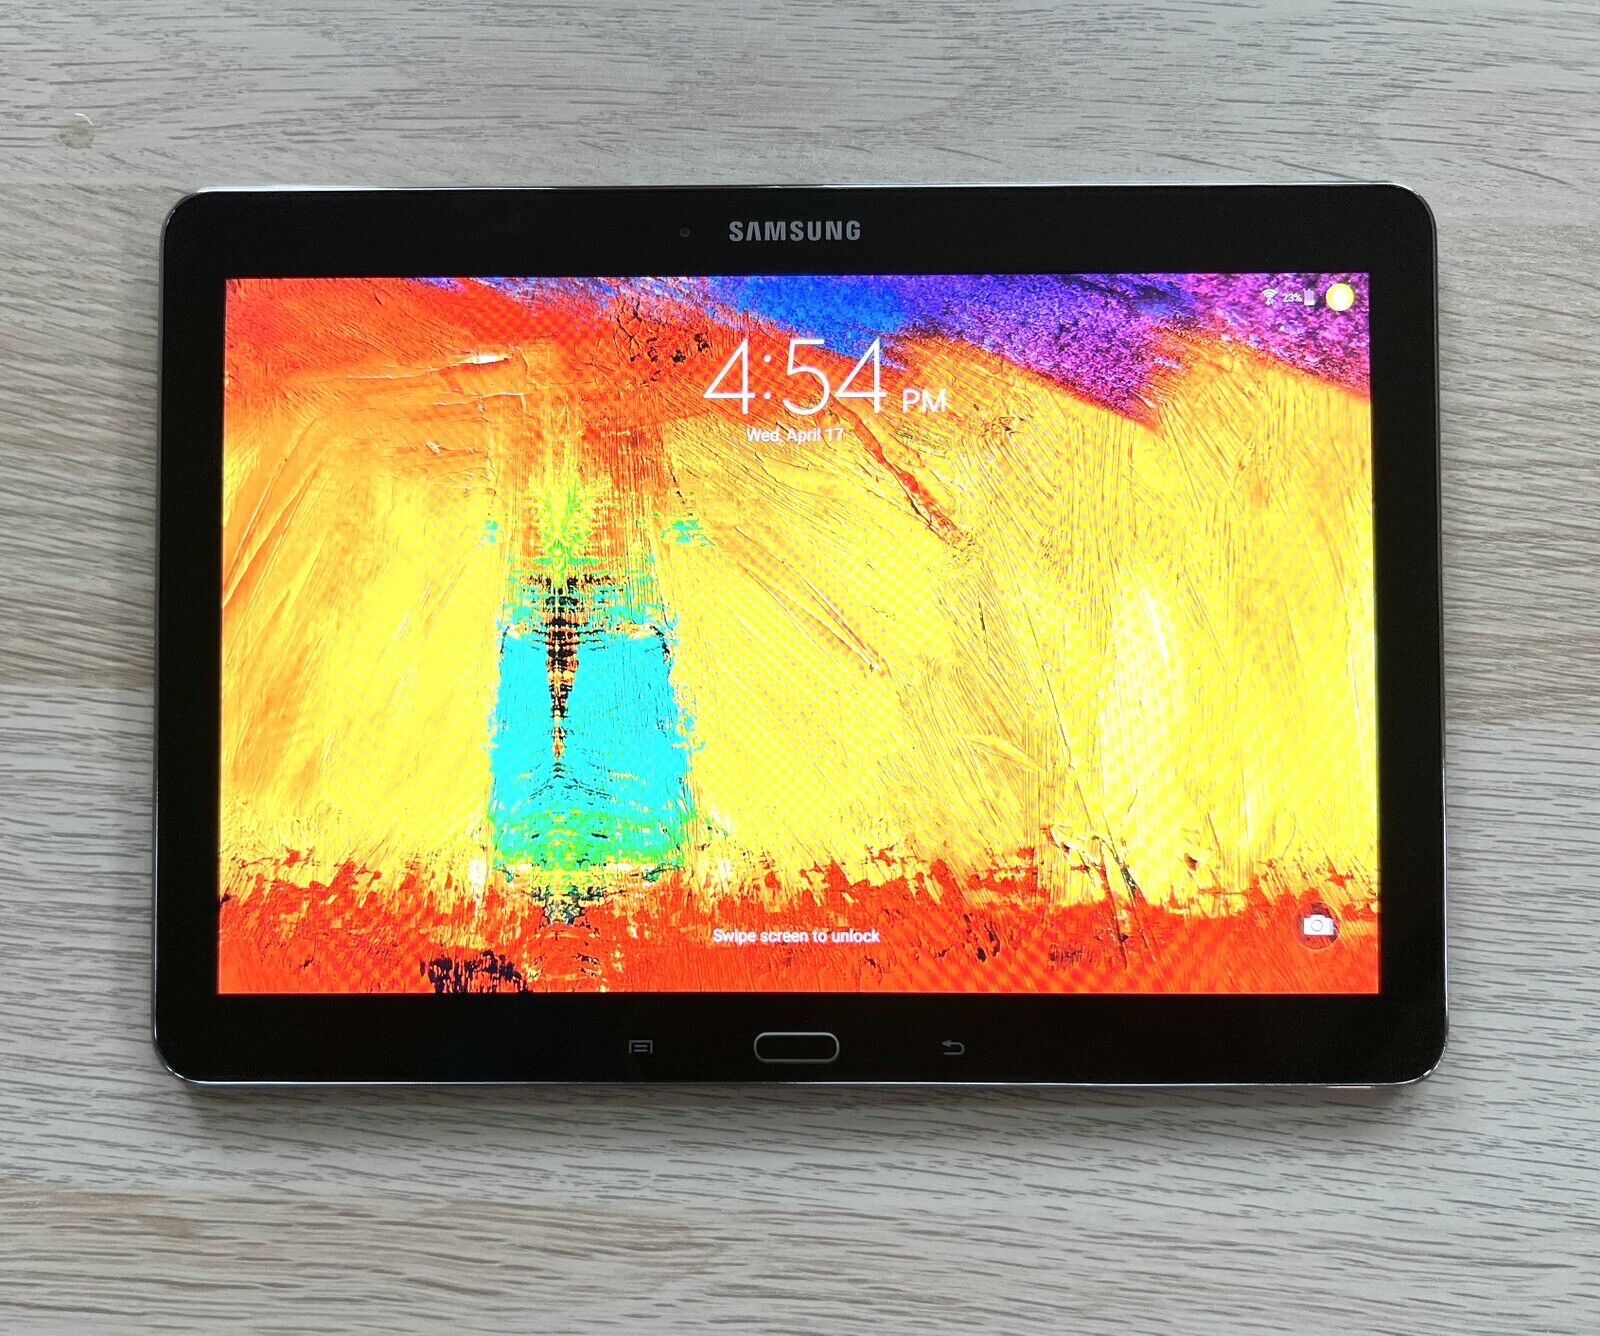 EXCELLENT SAMSUNG GALAXY TAB 4 - 10.1in SM-T537V - 16GB WIFI VERIZON ANDROID